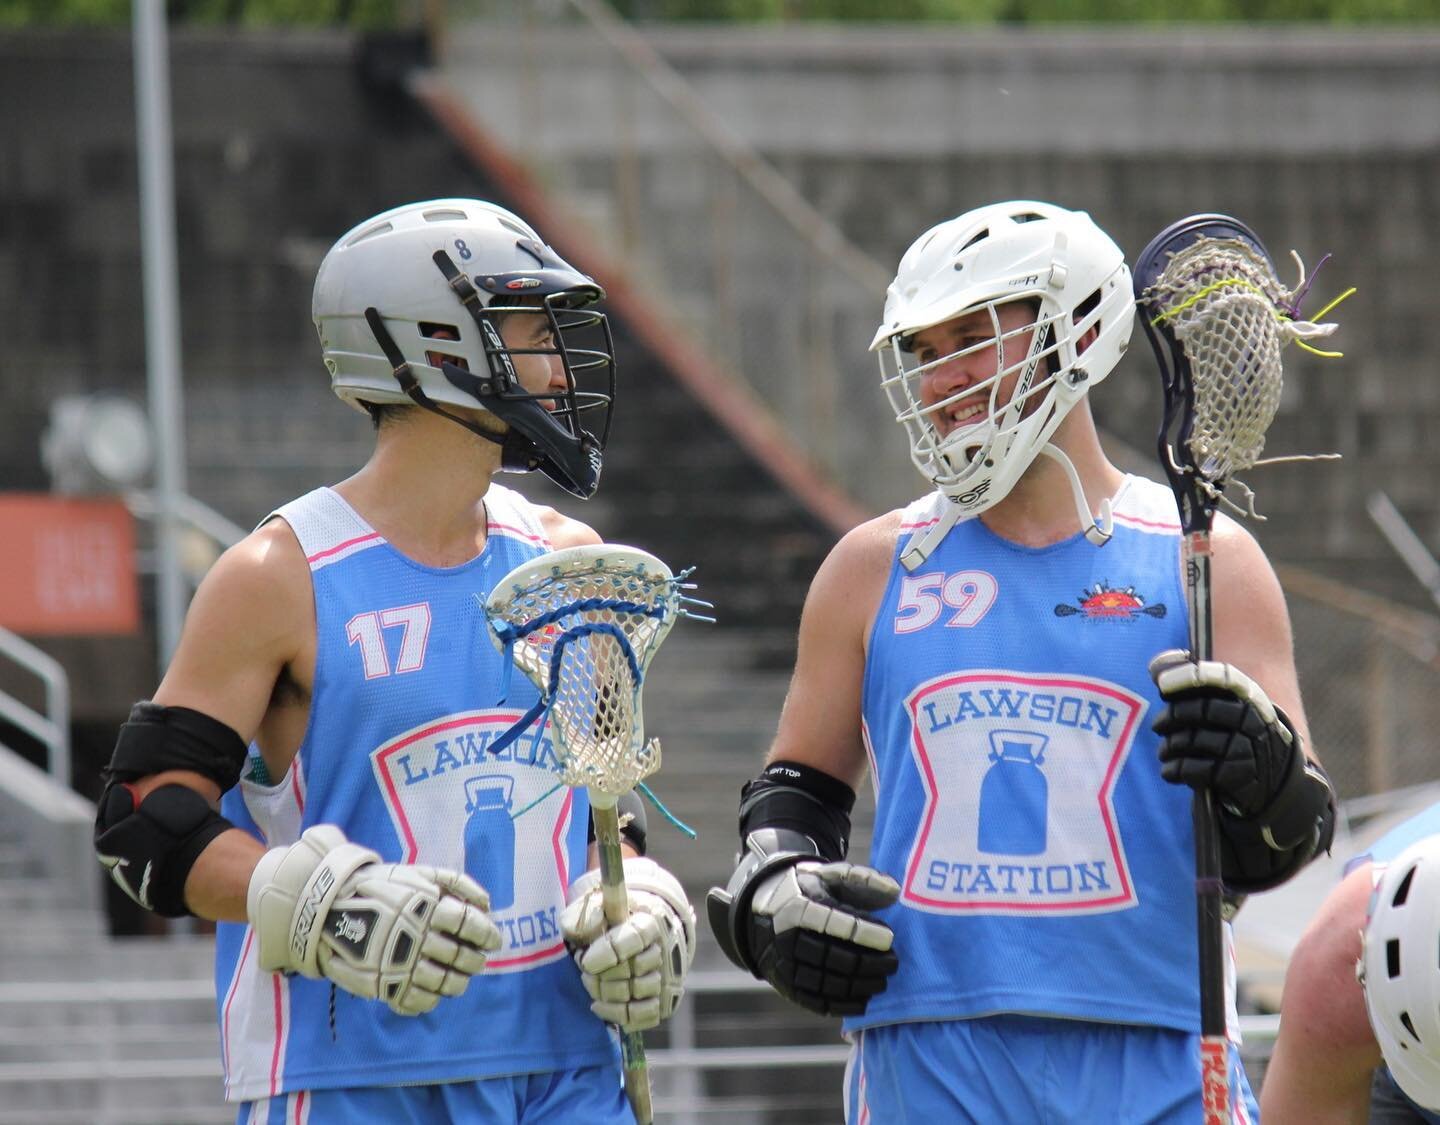 Men&rsquo;s last game - 2020 spring season

Many players are in Shanghai this summer, let&rsquo;s get some lacrosse going. 
We&rsquo;ll probably play most weekends until late August, so join us if you are in Shanghai!! We can&rsquo;t travel... BUT we